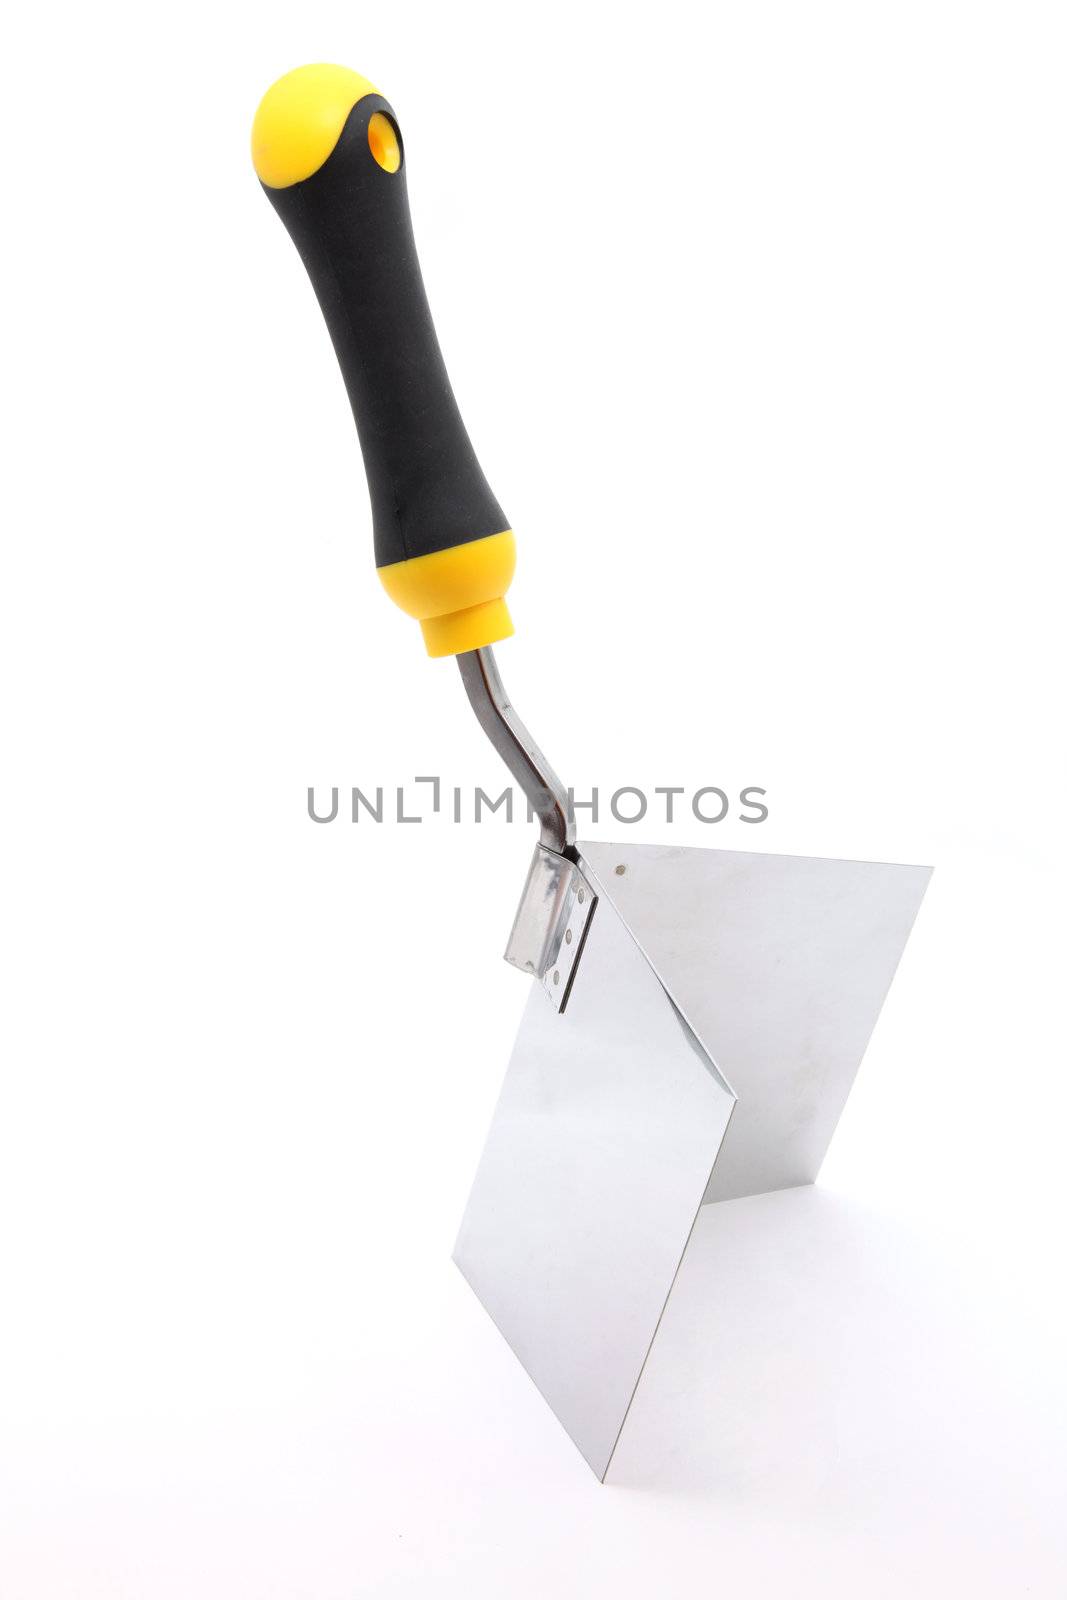 isolated of right angle lute trowel for construction industry over white background